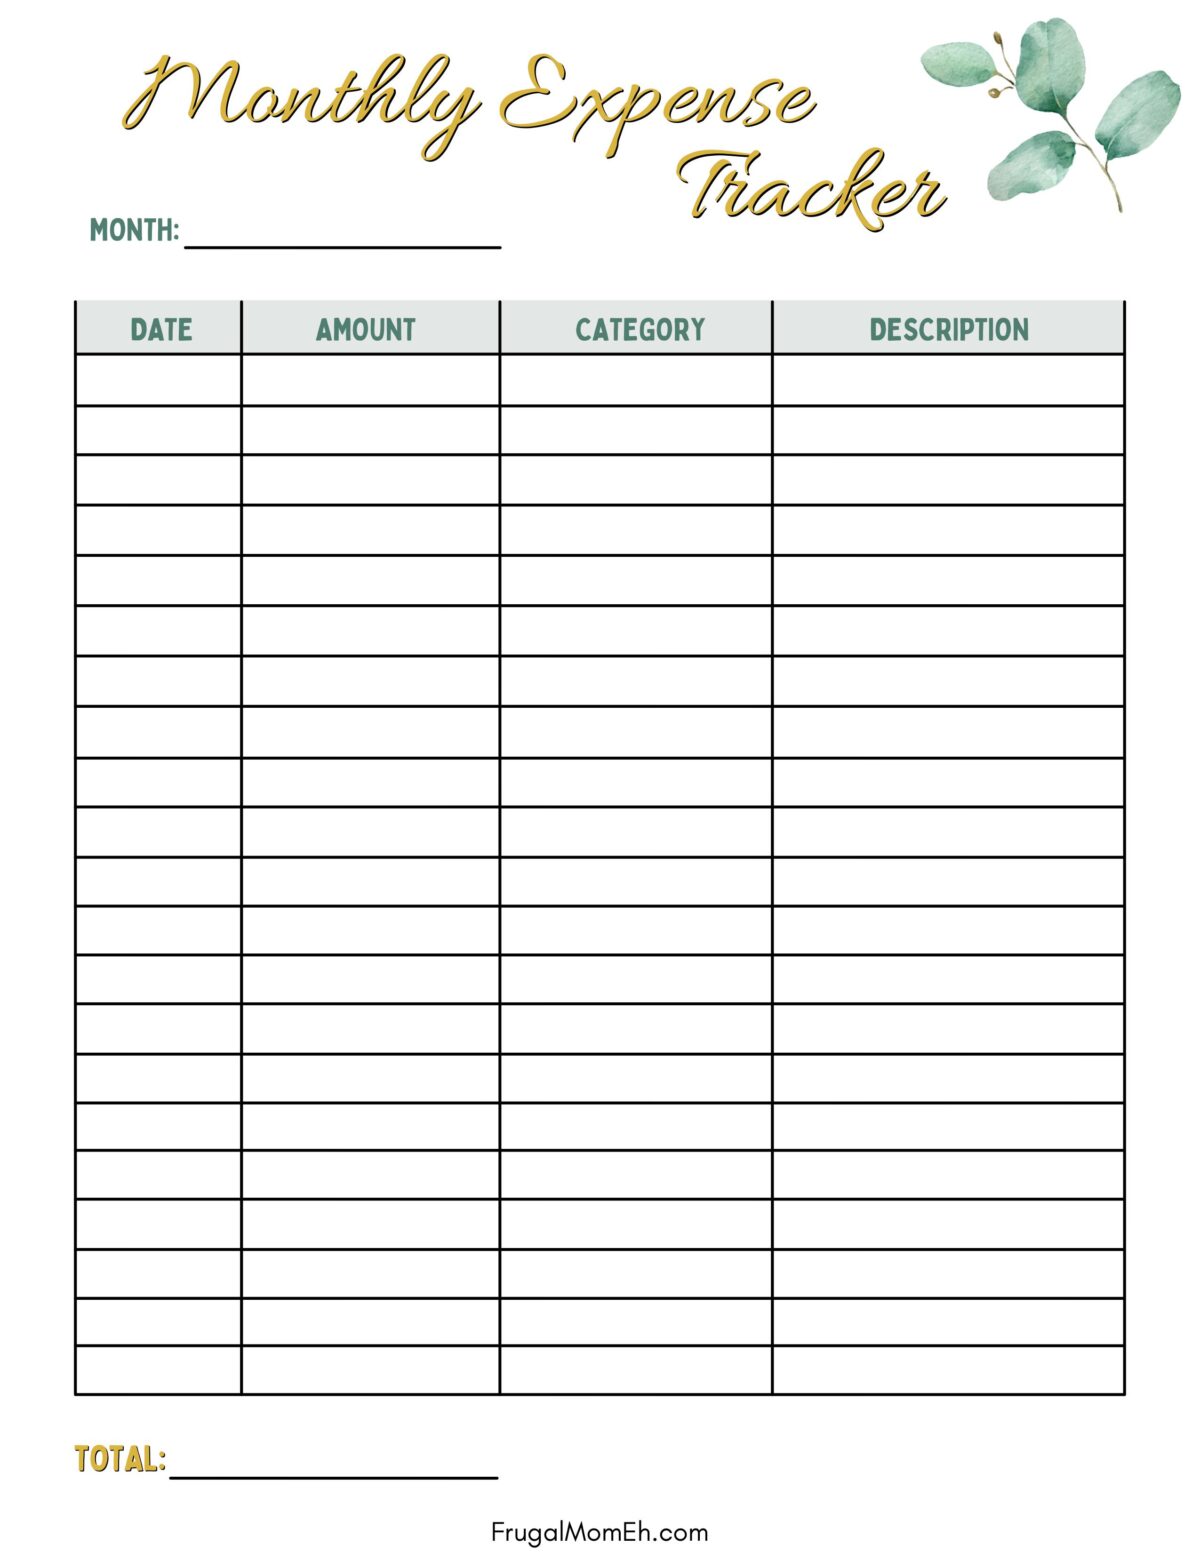 Monthly Expense Tracker Sheet